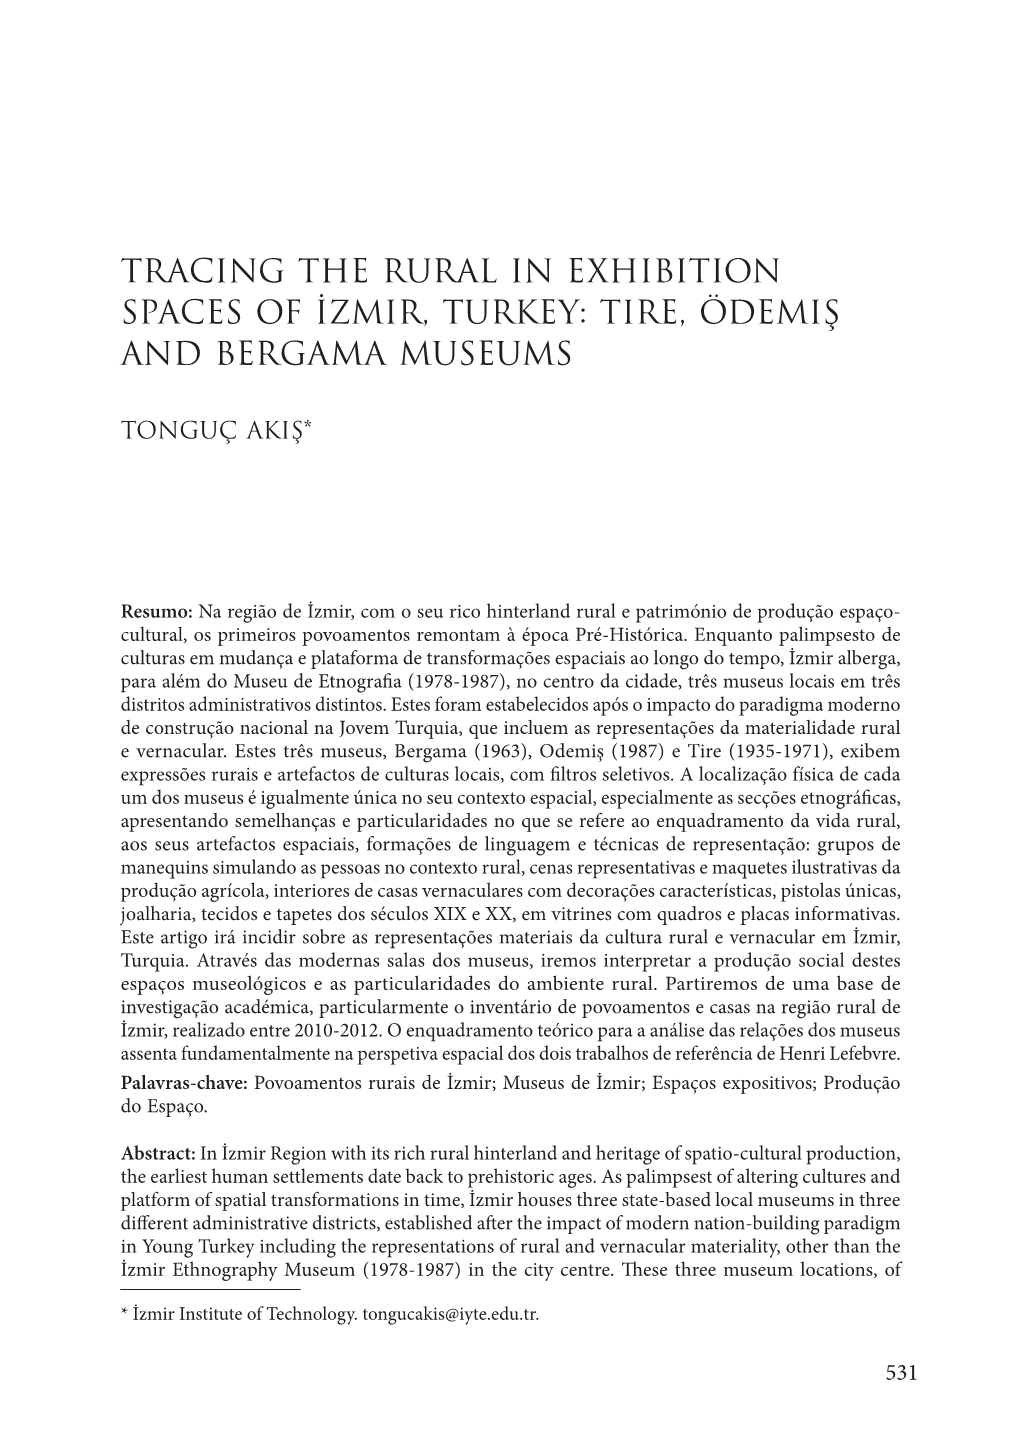 Tracing the Rural in Exhibition Spaces of Izmir, Turkey: Tire, Ödemiş and Bergama Museums